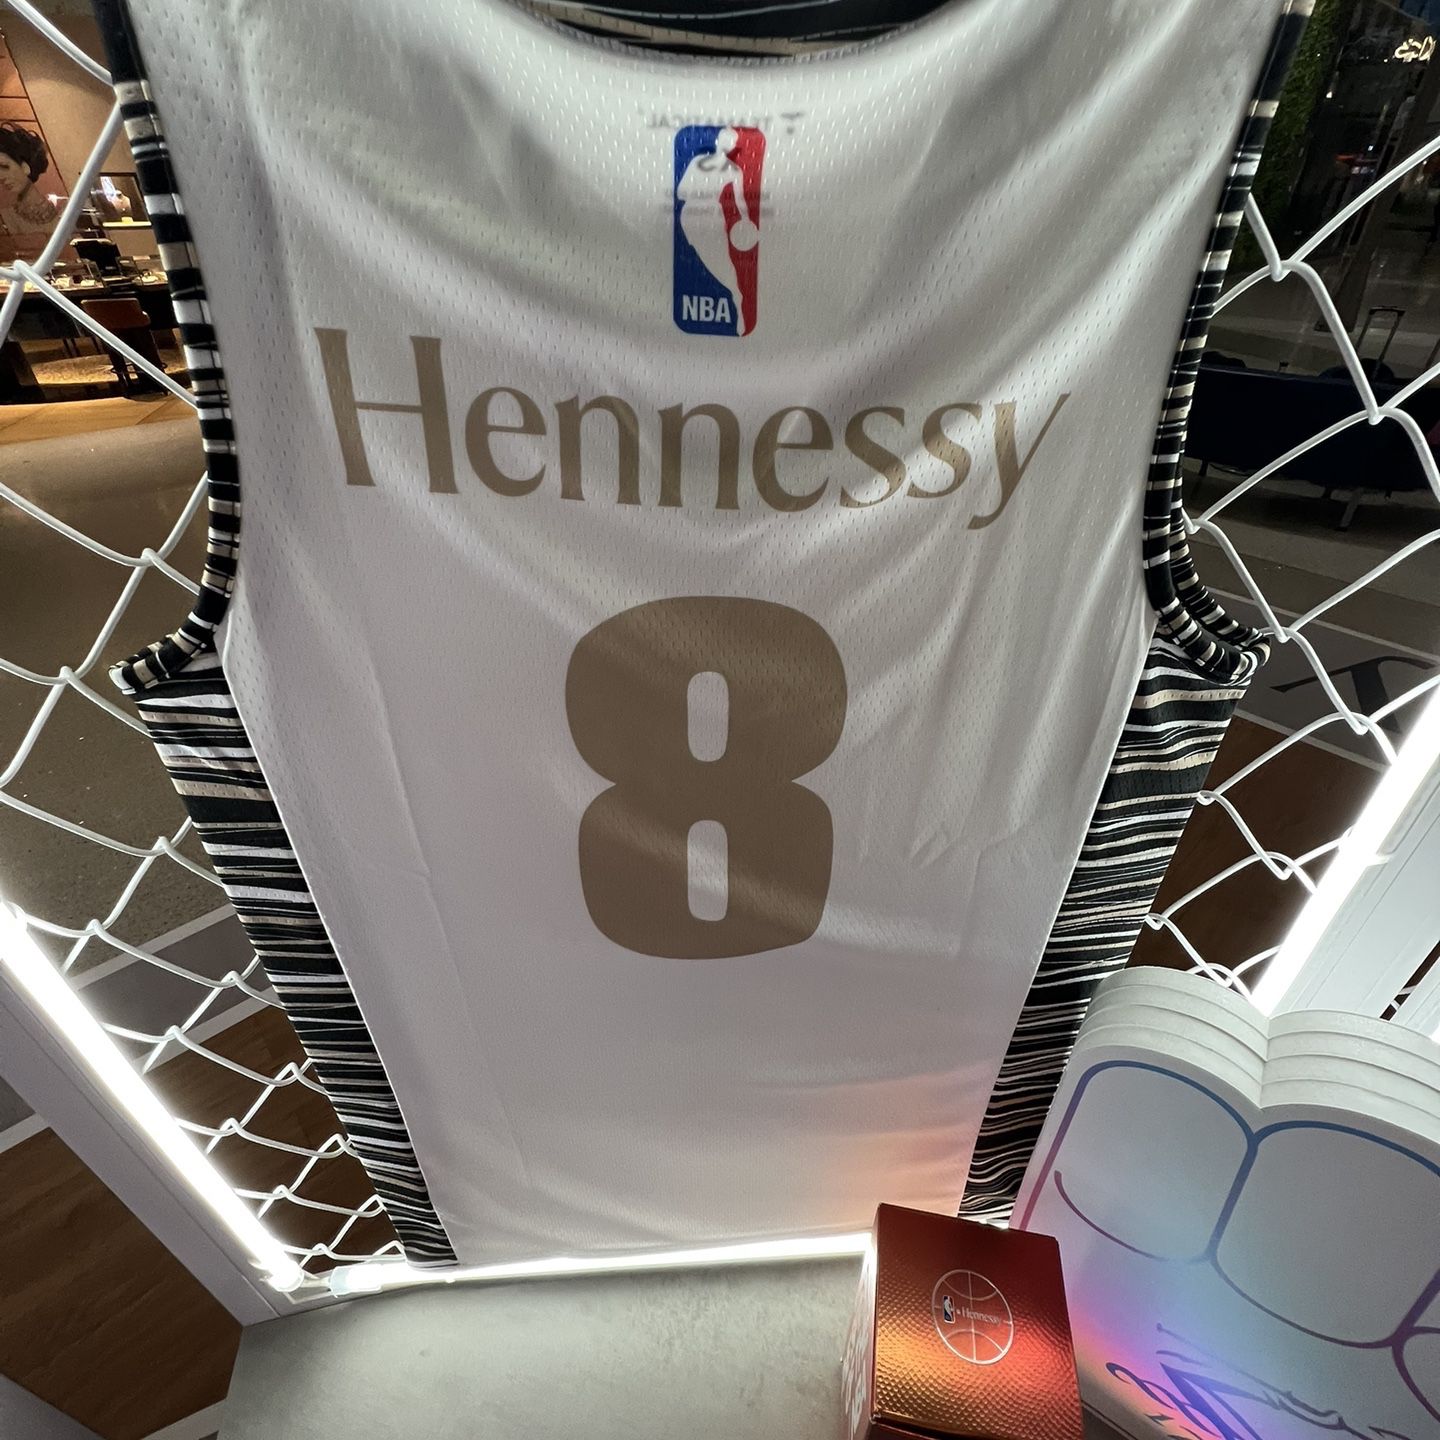 Supreme NBA jersey size Large for Sale in Huntington Park, CA - OfferUp